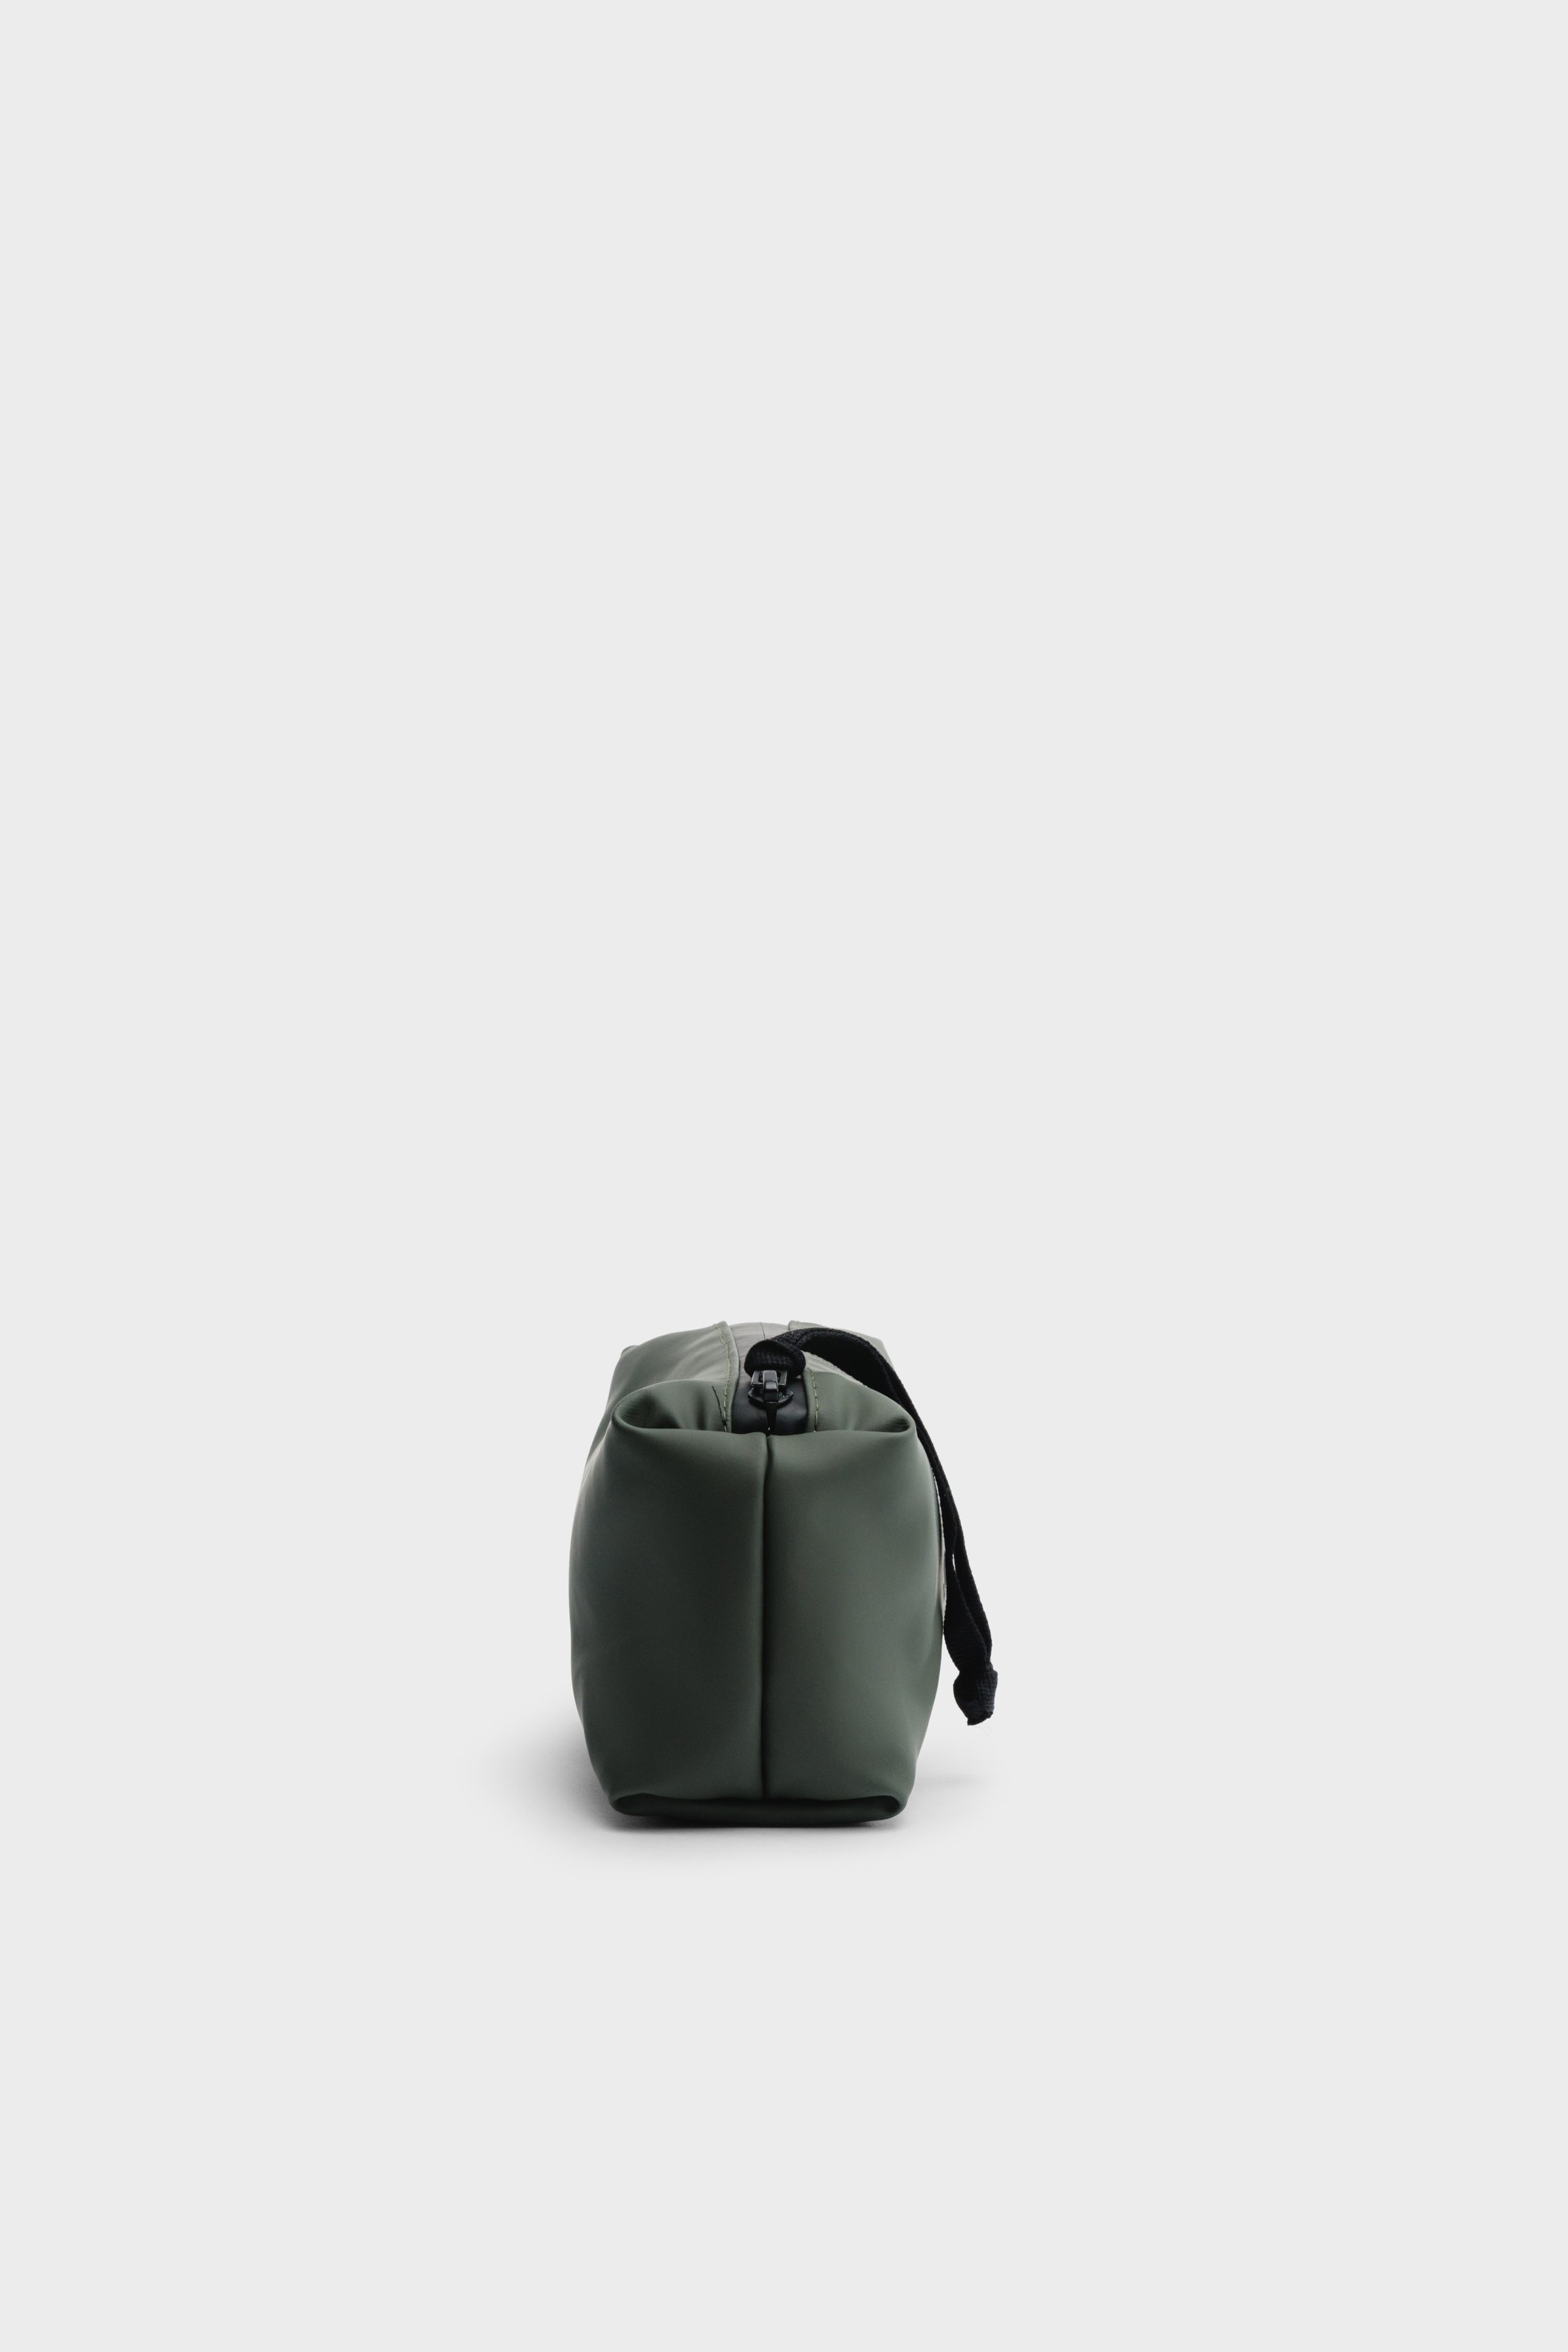 Container Small Wash Bag Green - 4